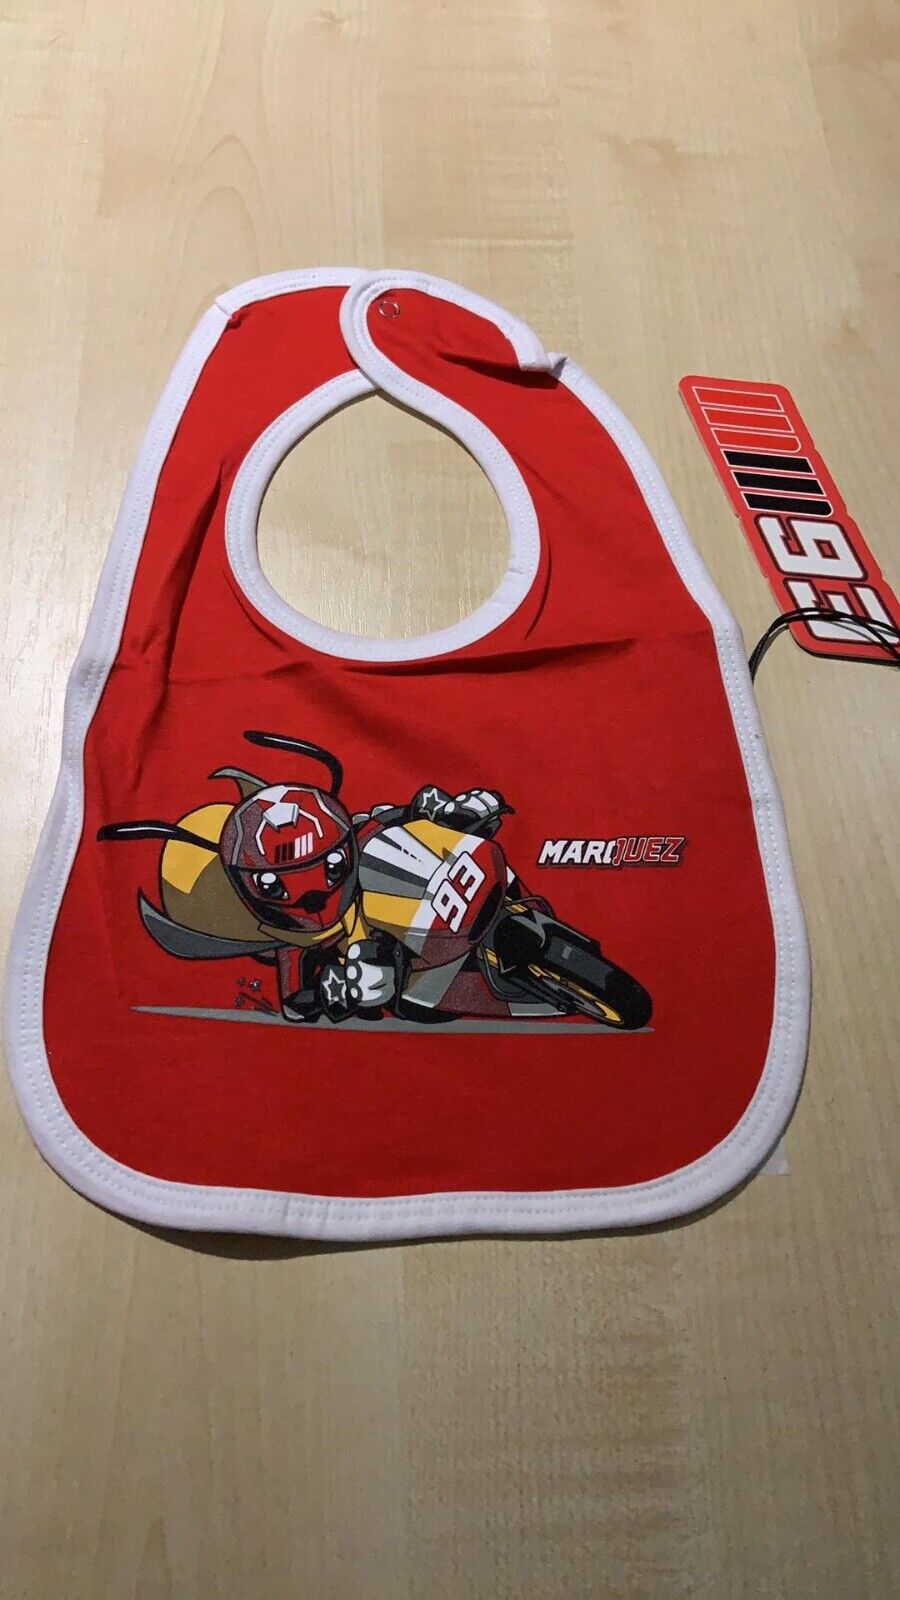 New Official Marc Marquez 93 Baby Bib -